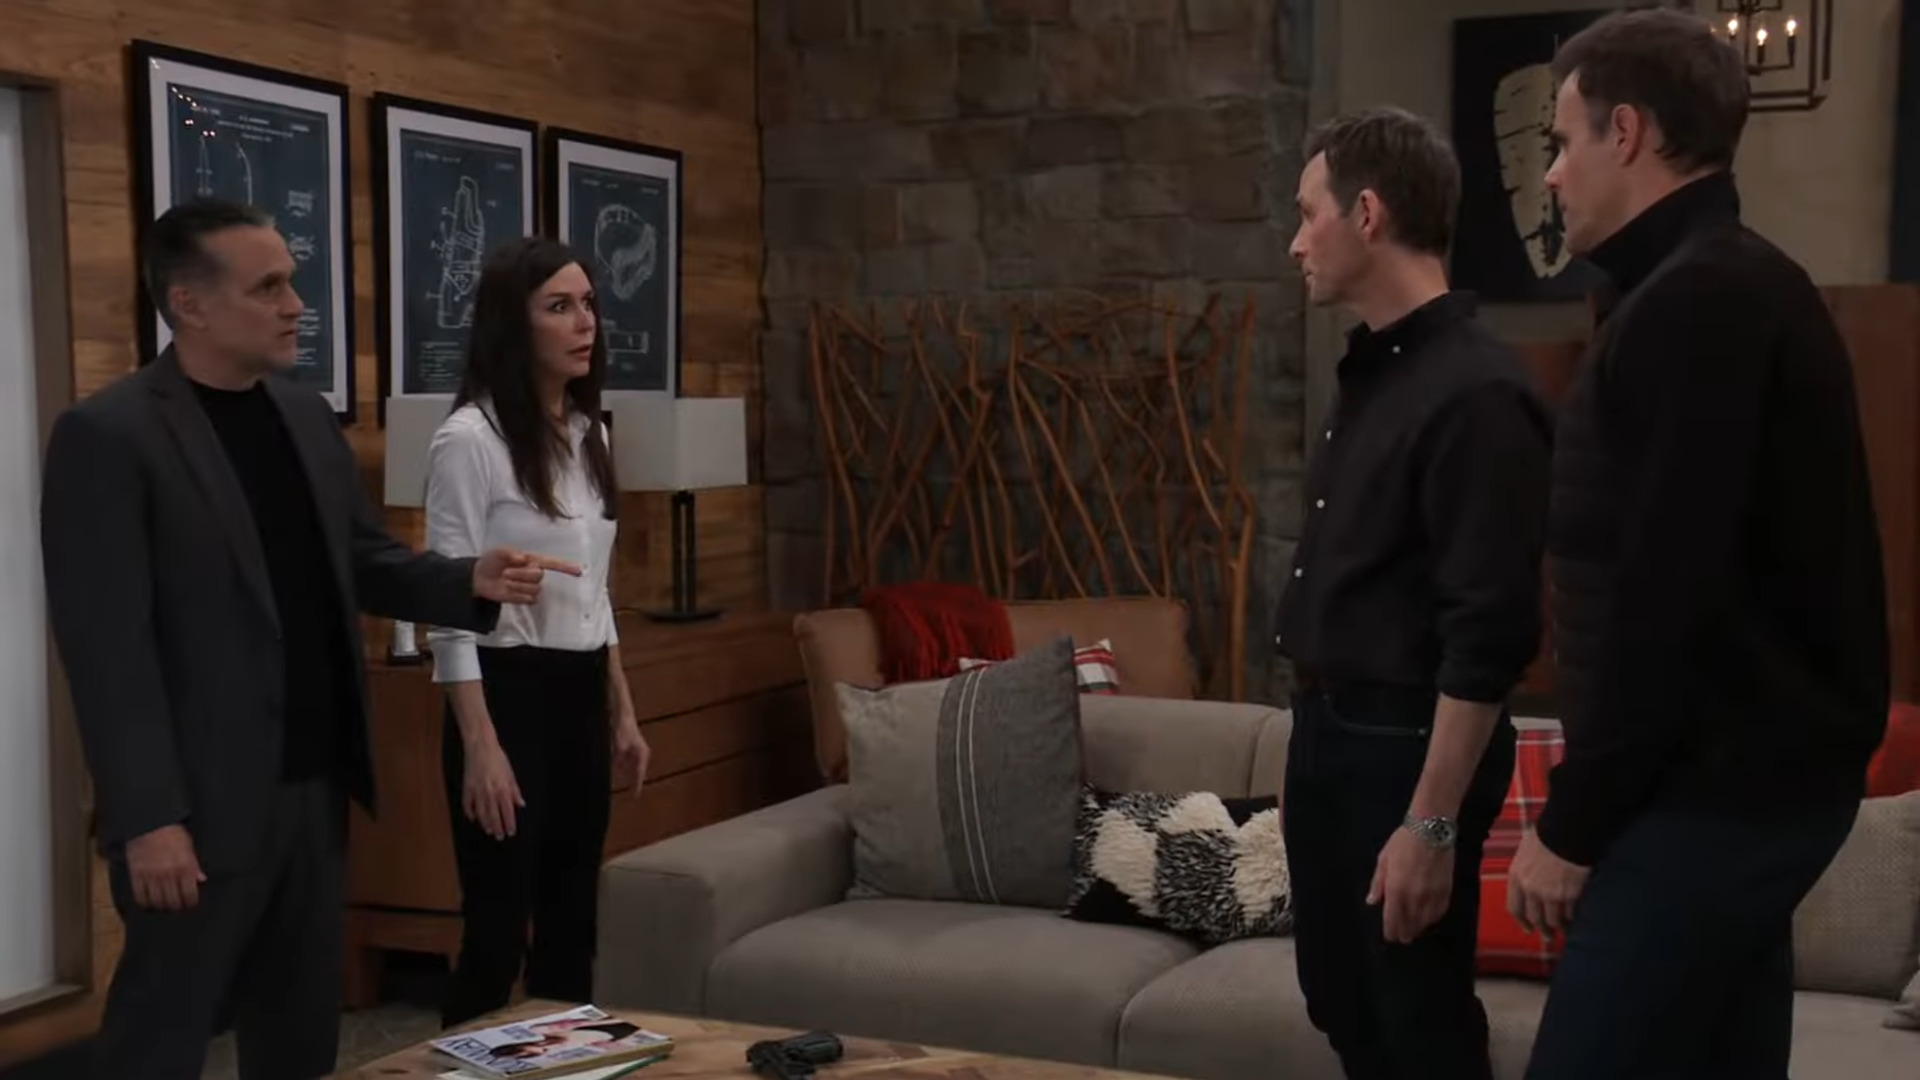 sonny tells anna and valentin they'll be signing their death warrant